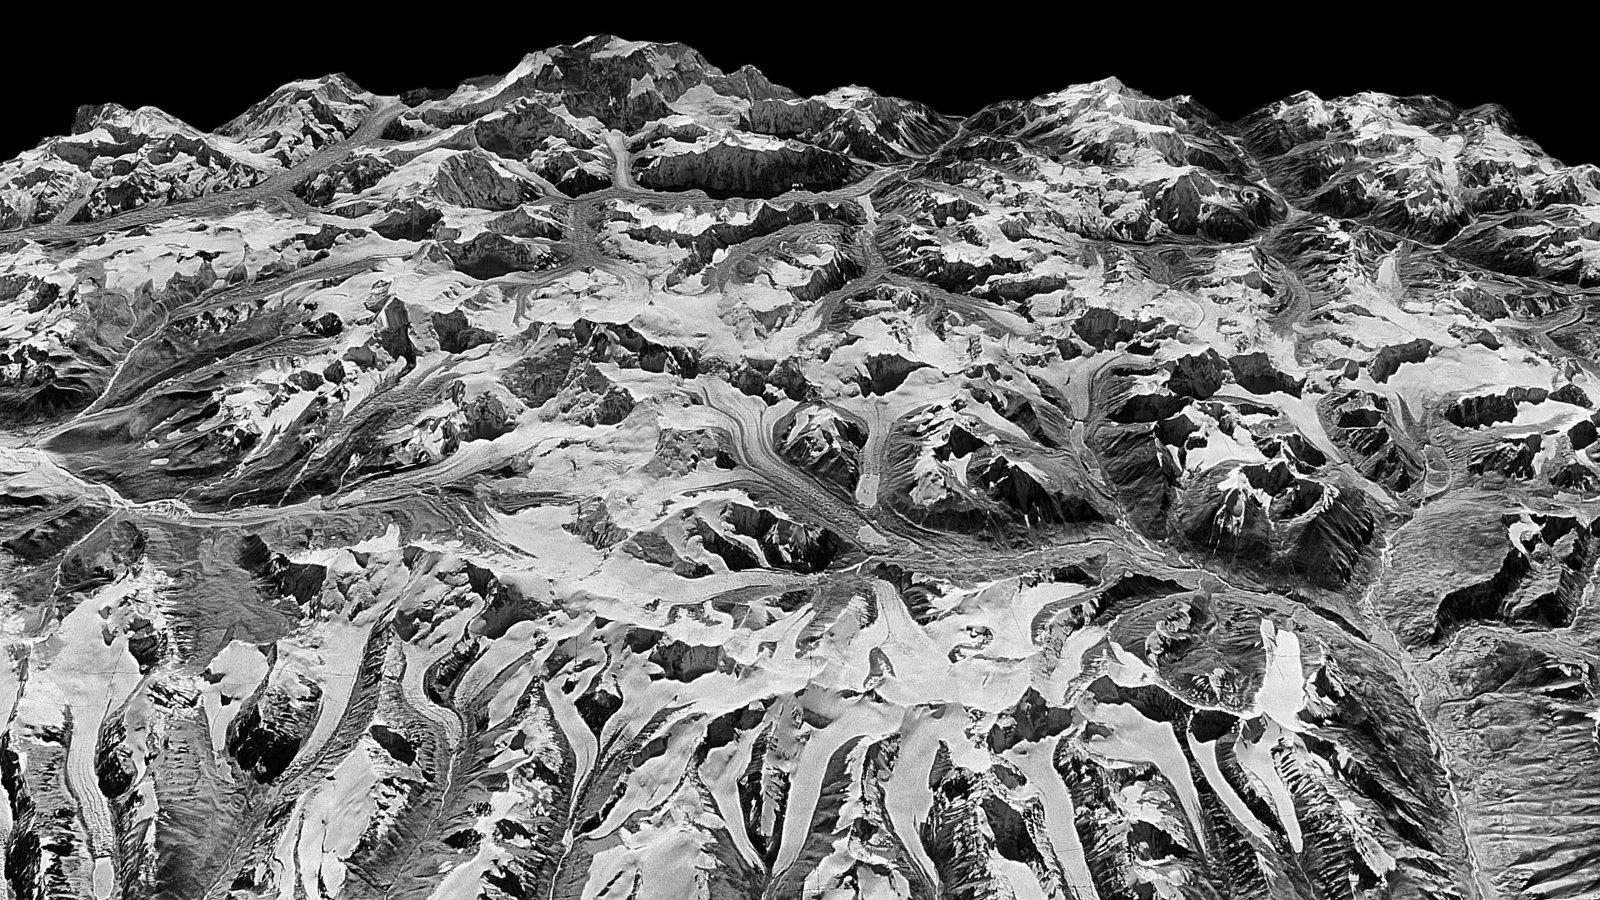 Decades of spy satellite images help track melting Himalayan glaciers | DeviceDaily.com